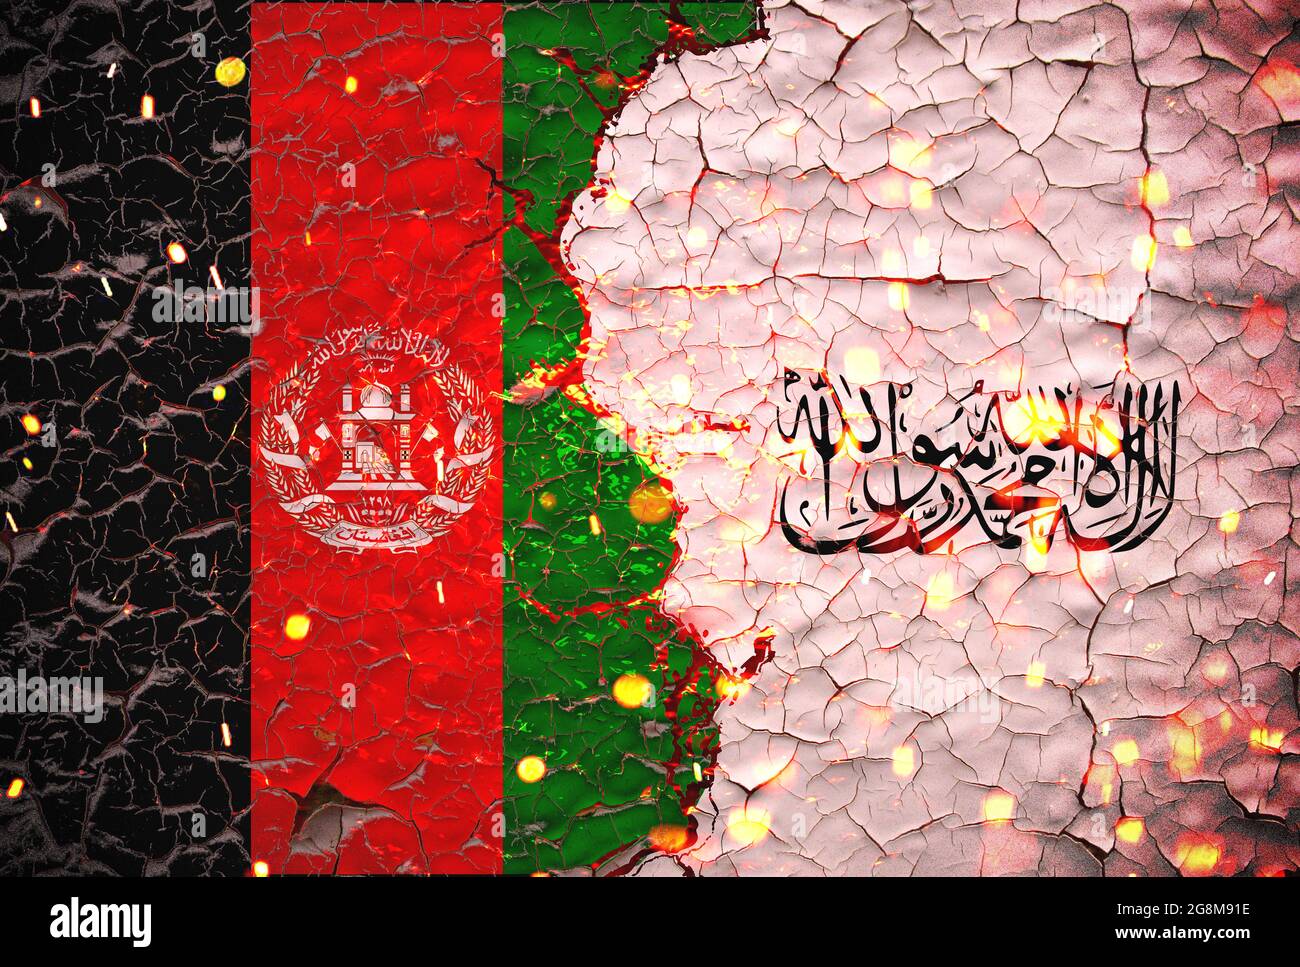 Afghanistan and Taliban flags painted over cracked concrete wall.And lava flows behind. Afghanistan vs Taliban war. Stock Photo